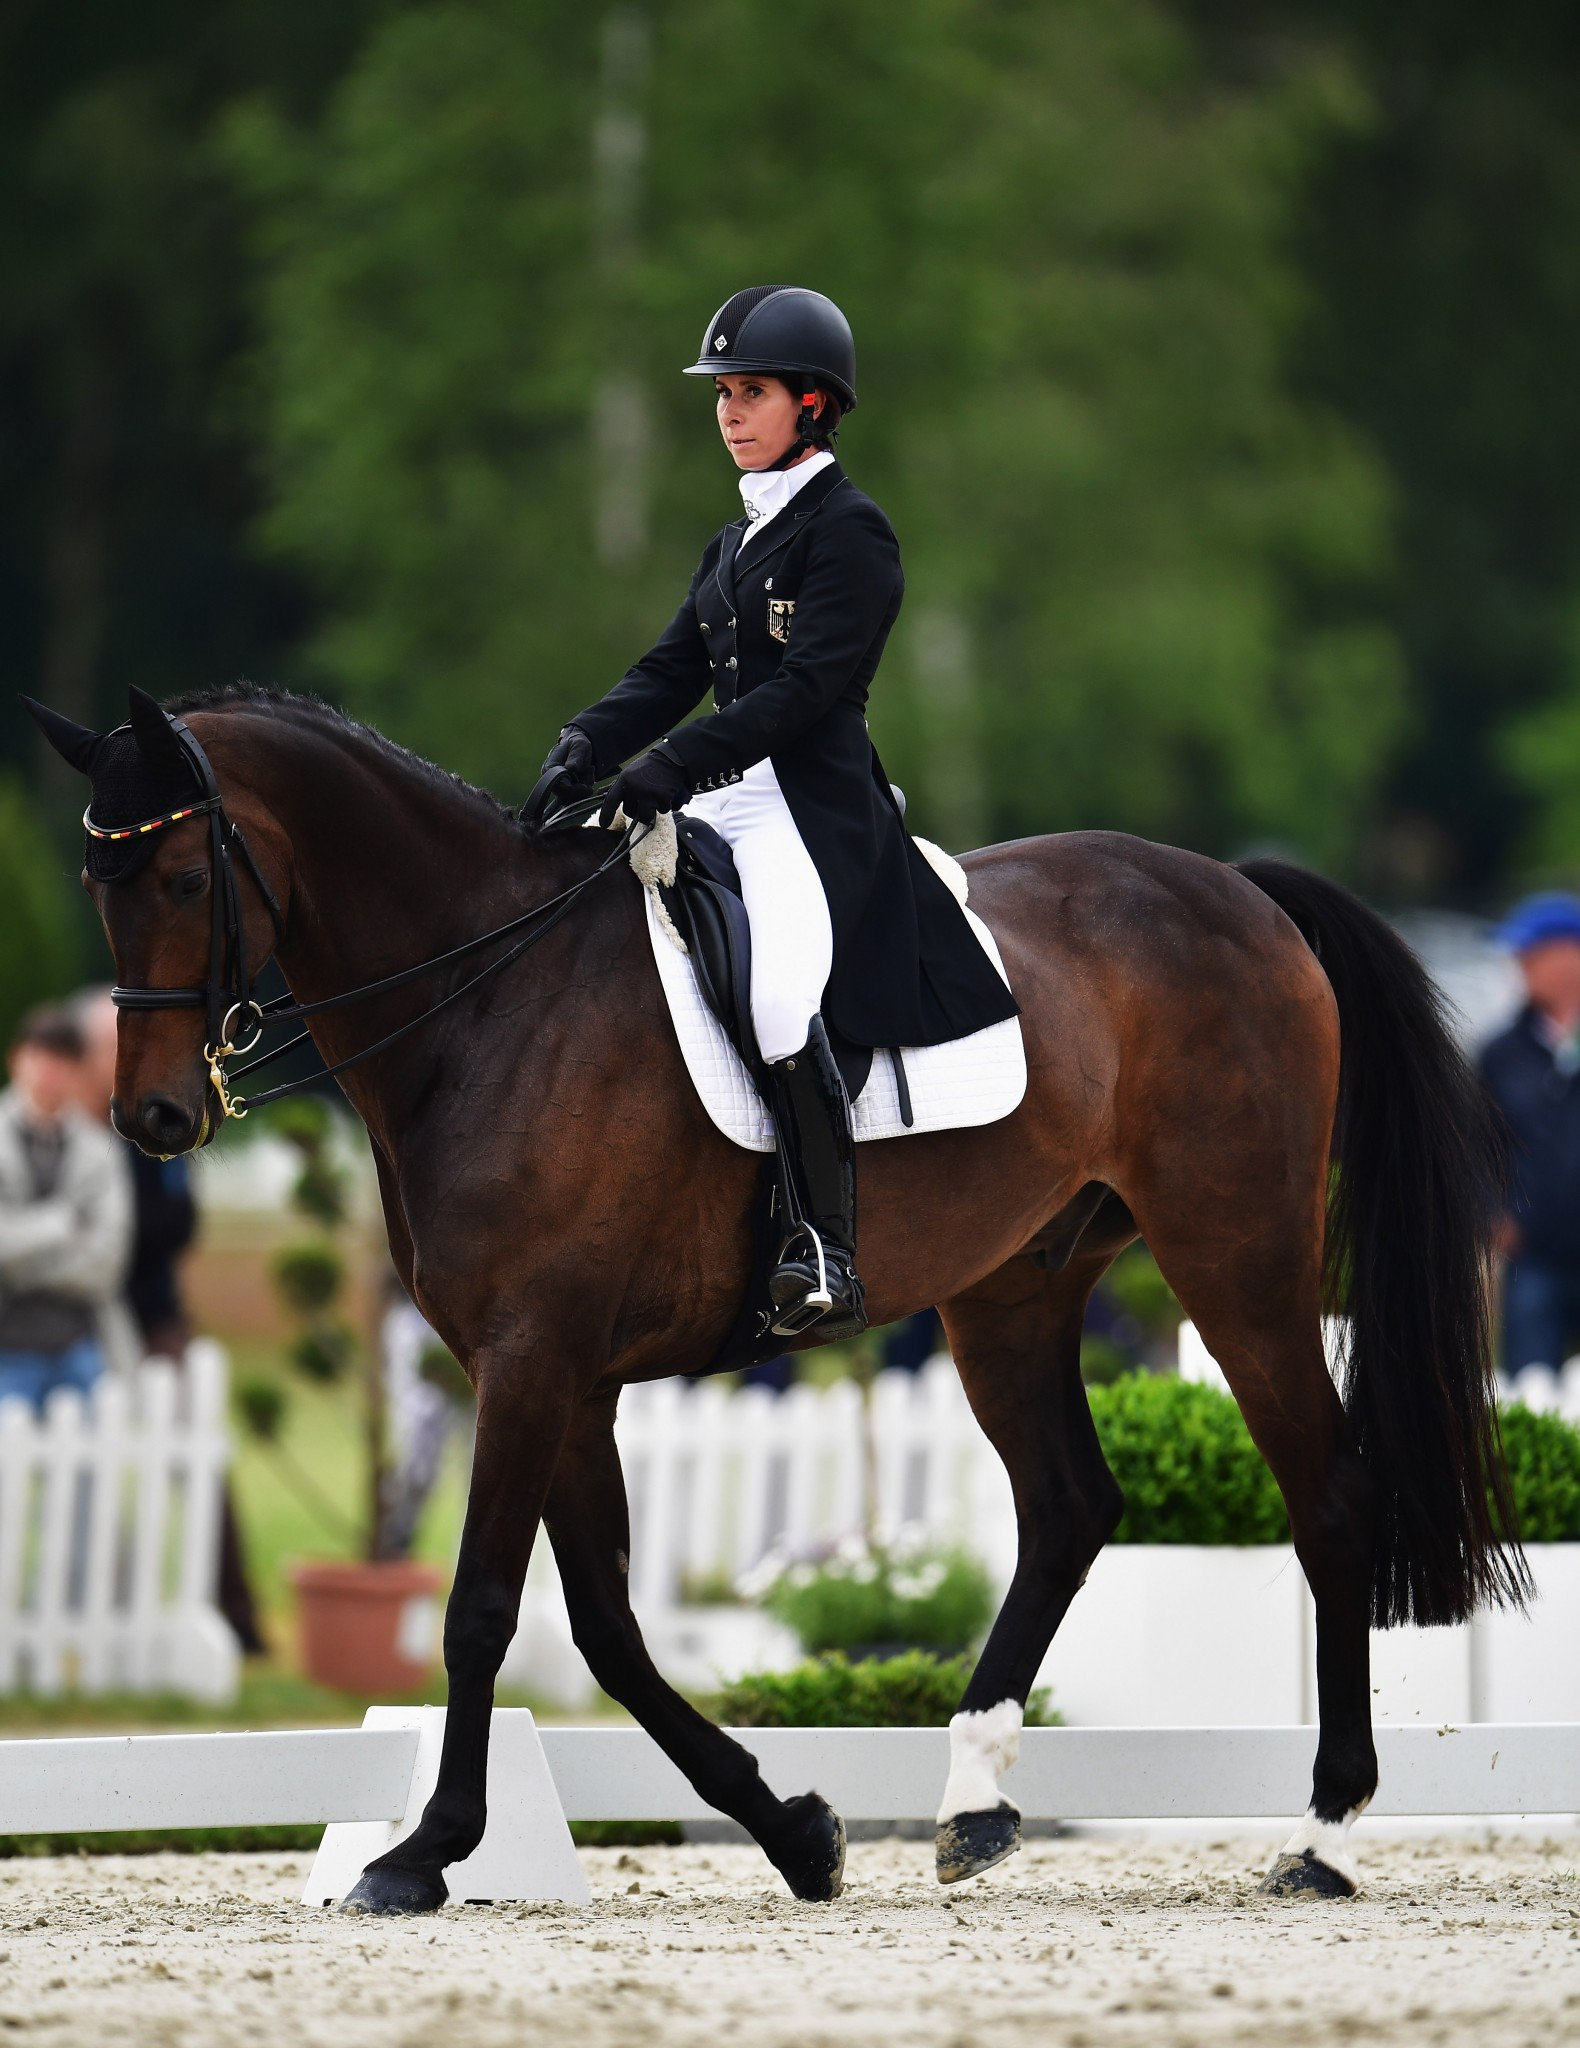 Bettina Hoy leads after the opening day of dressage ©Getty Images